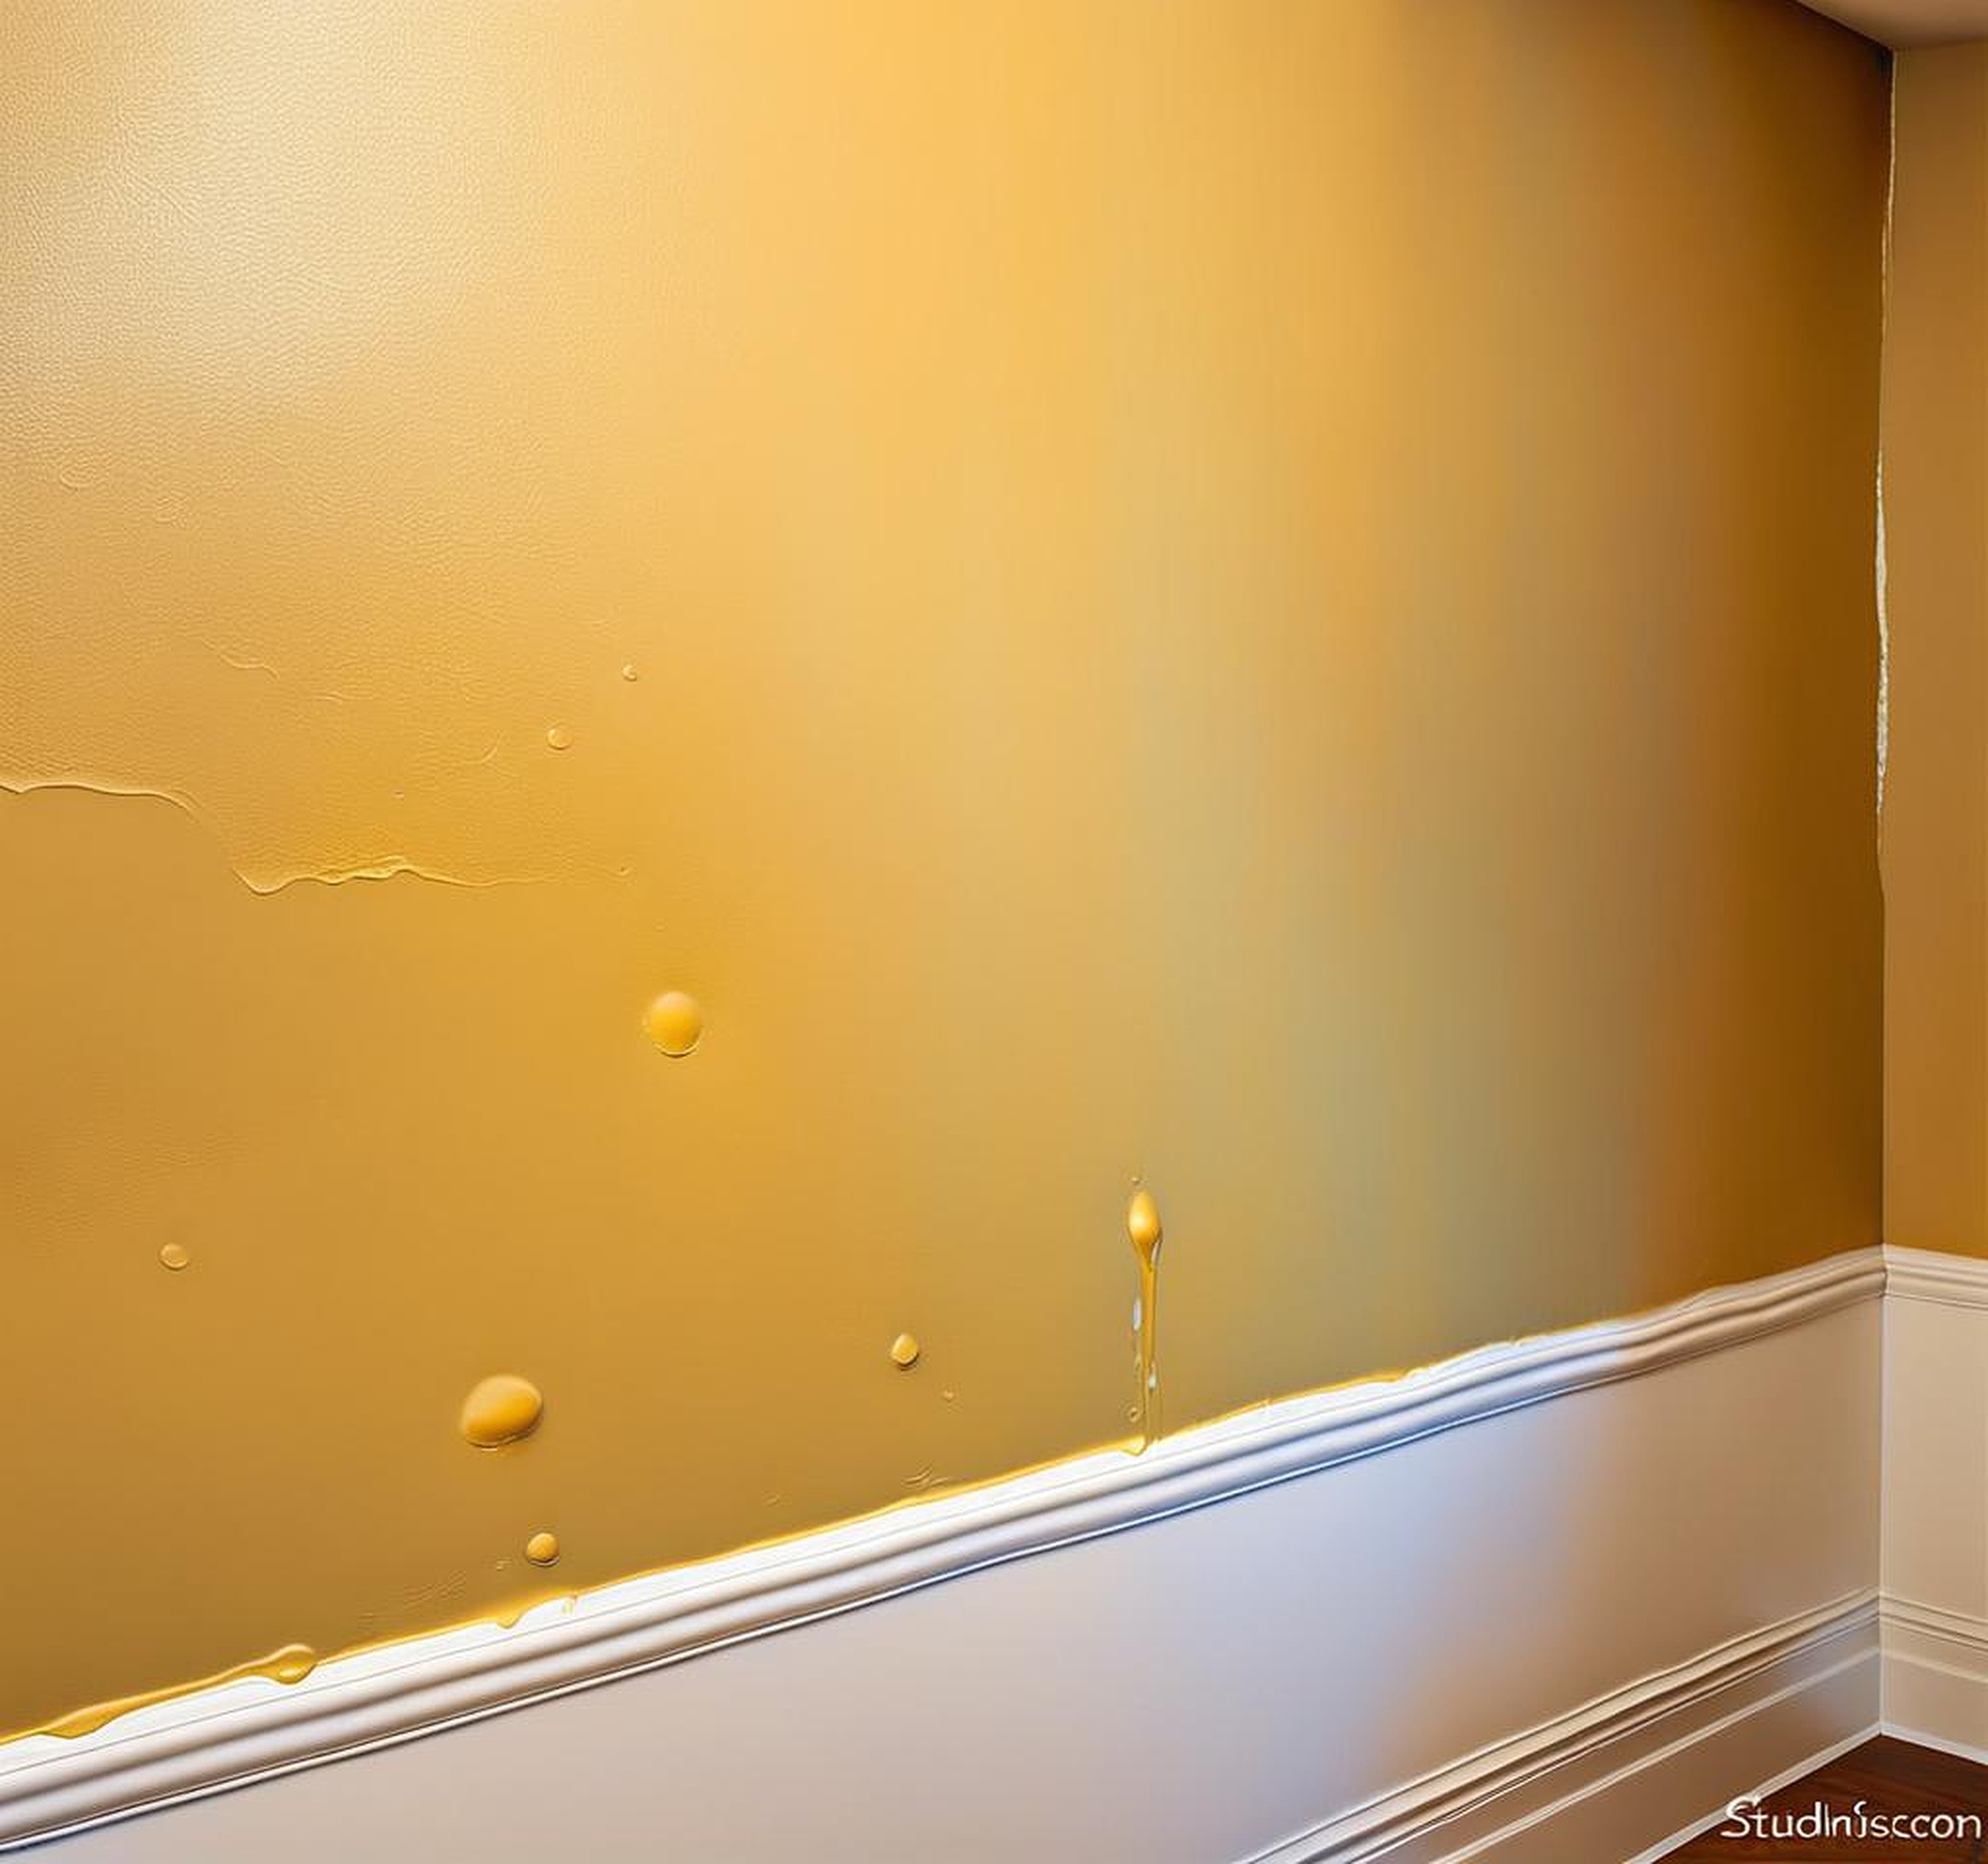 How to Fix Paint Bubbling on Walls Caused by Water Damage